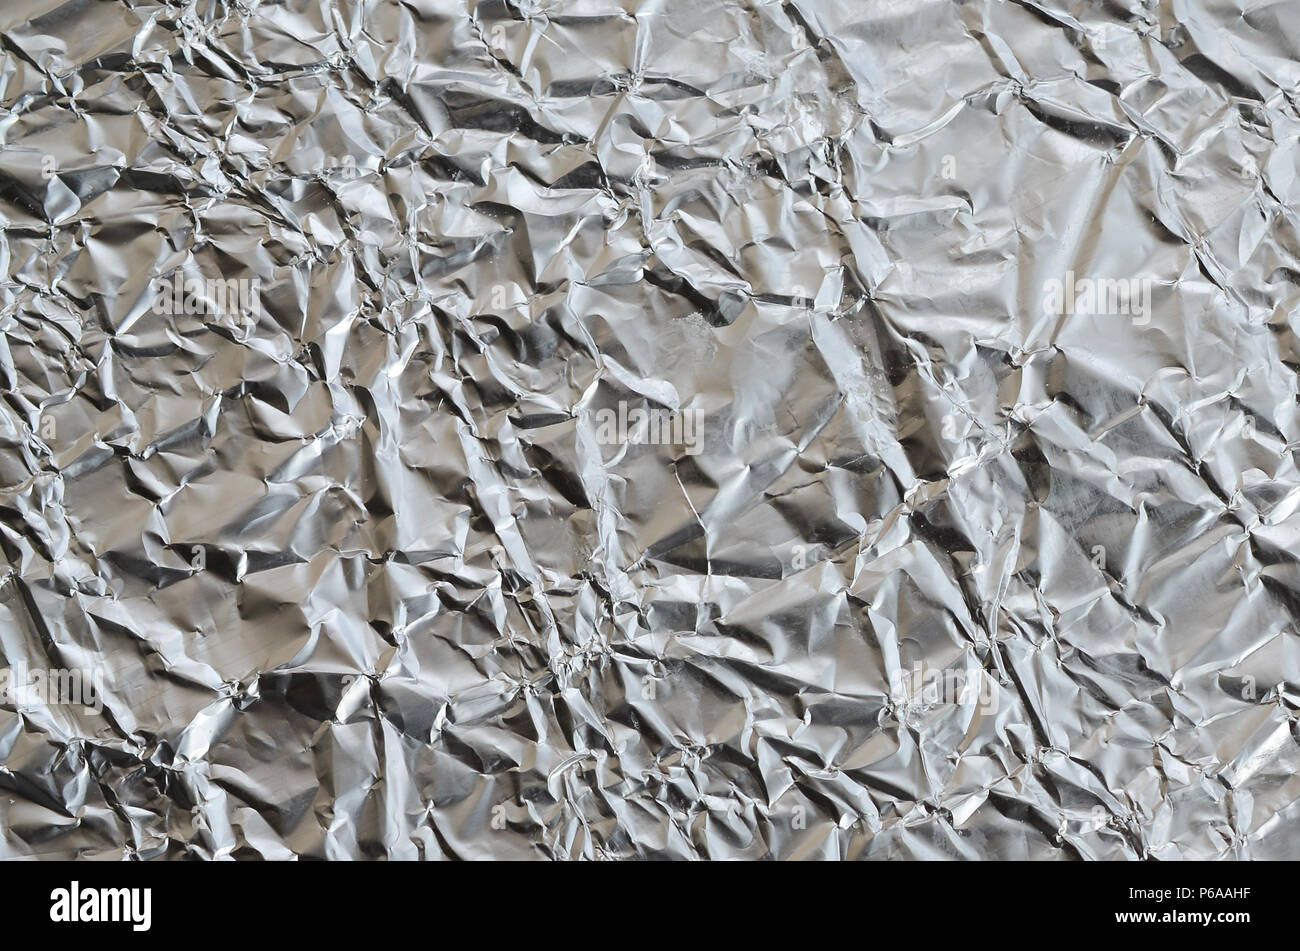 Full Frame Take Of A Sheet Of Crumpled Silver Aluminum Foil Stock Photo -  Download Image Now - iStock